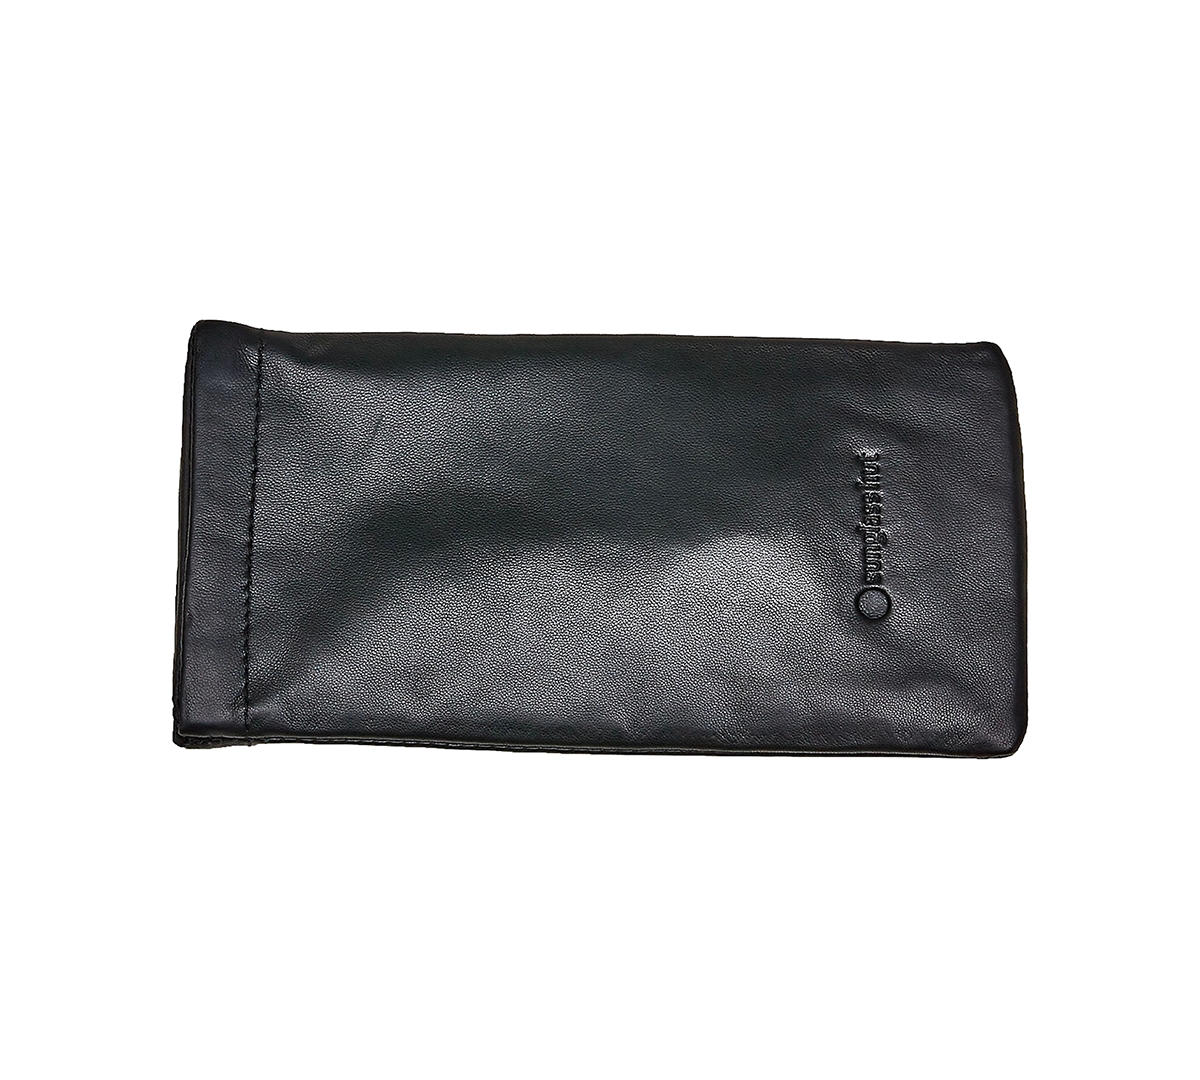 Sunglass Hut Small Faux Leather Case, AHU0004AT - Black